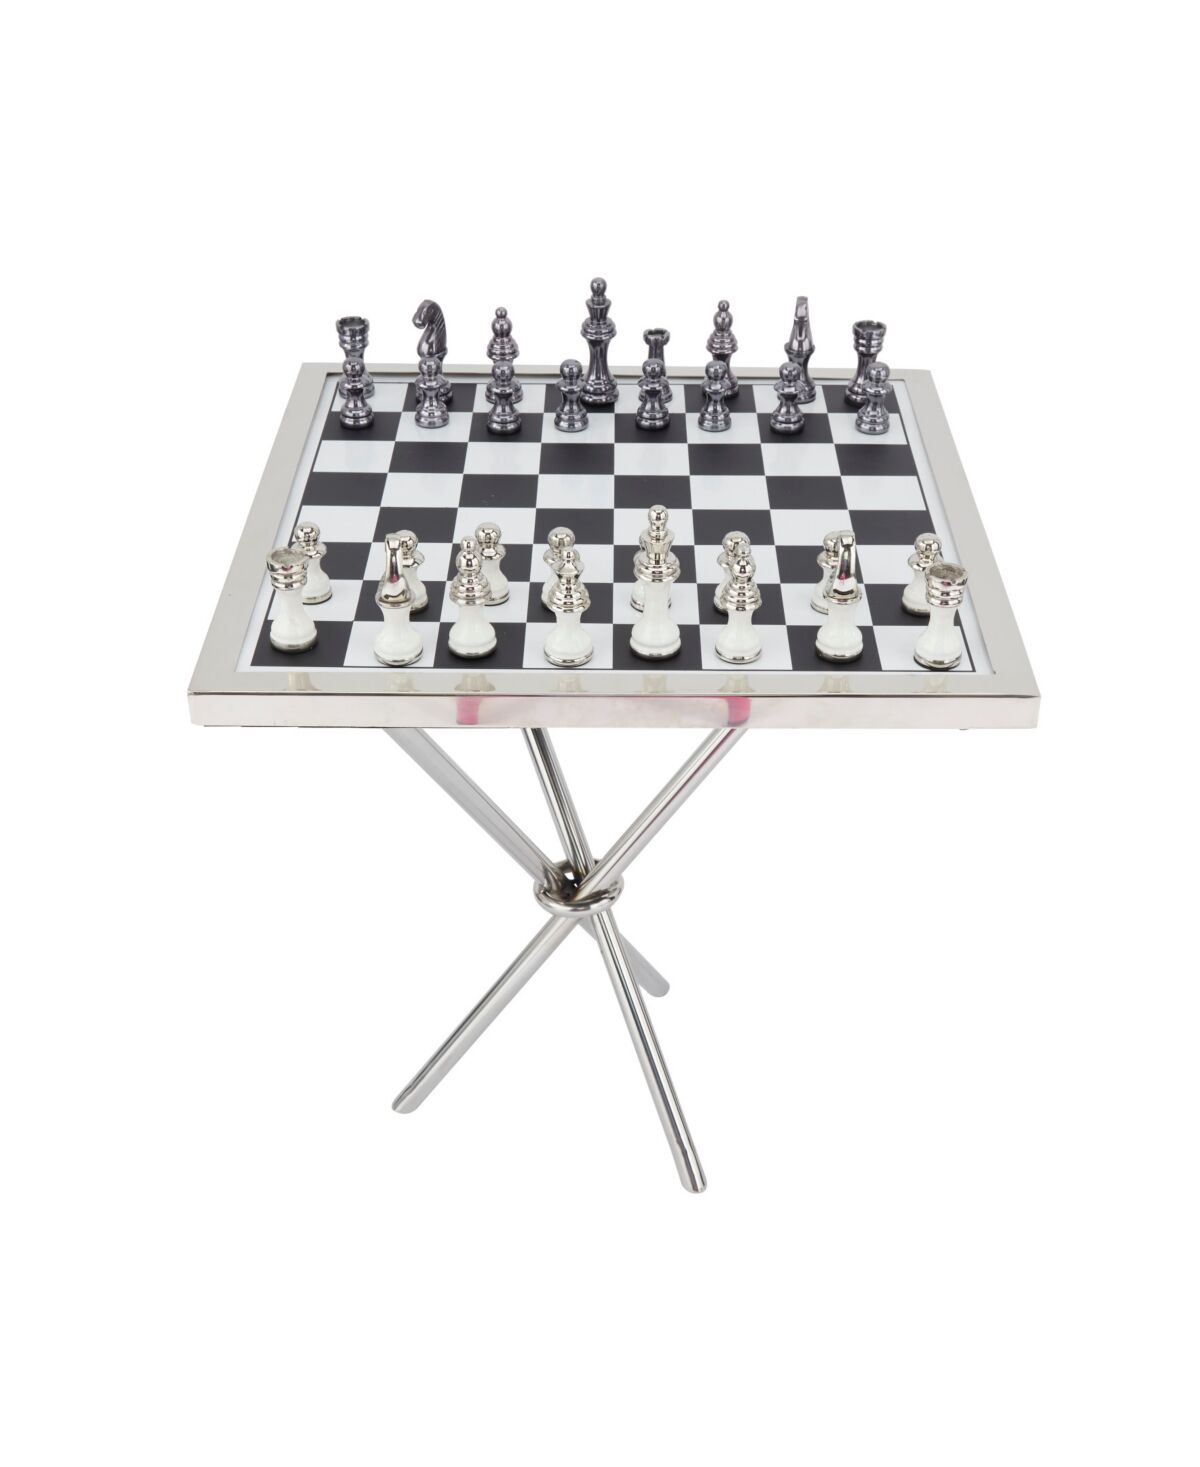 Rosemary Lane Aluminum Contemporary Game Table Set, 33 Pieces - Silver-Tone